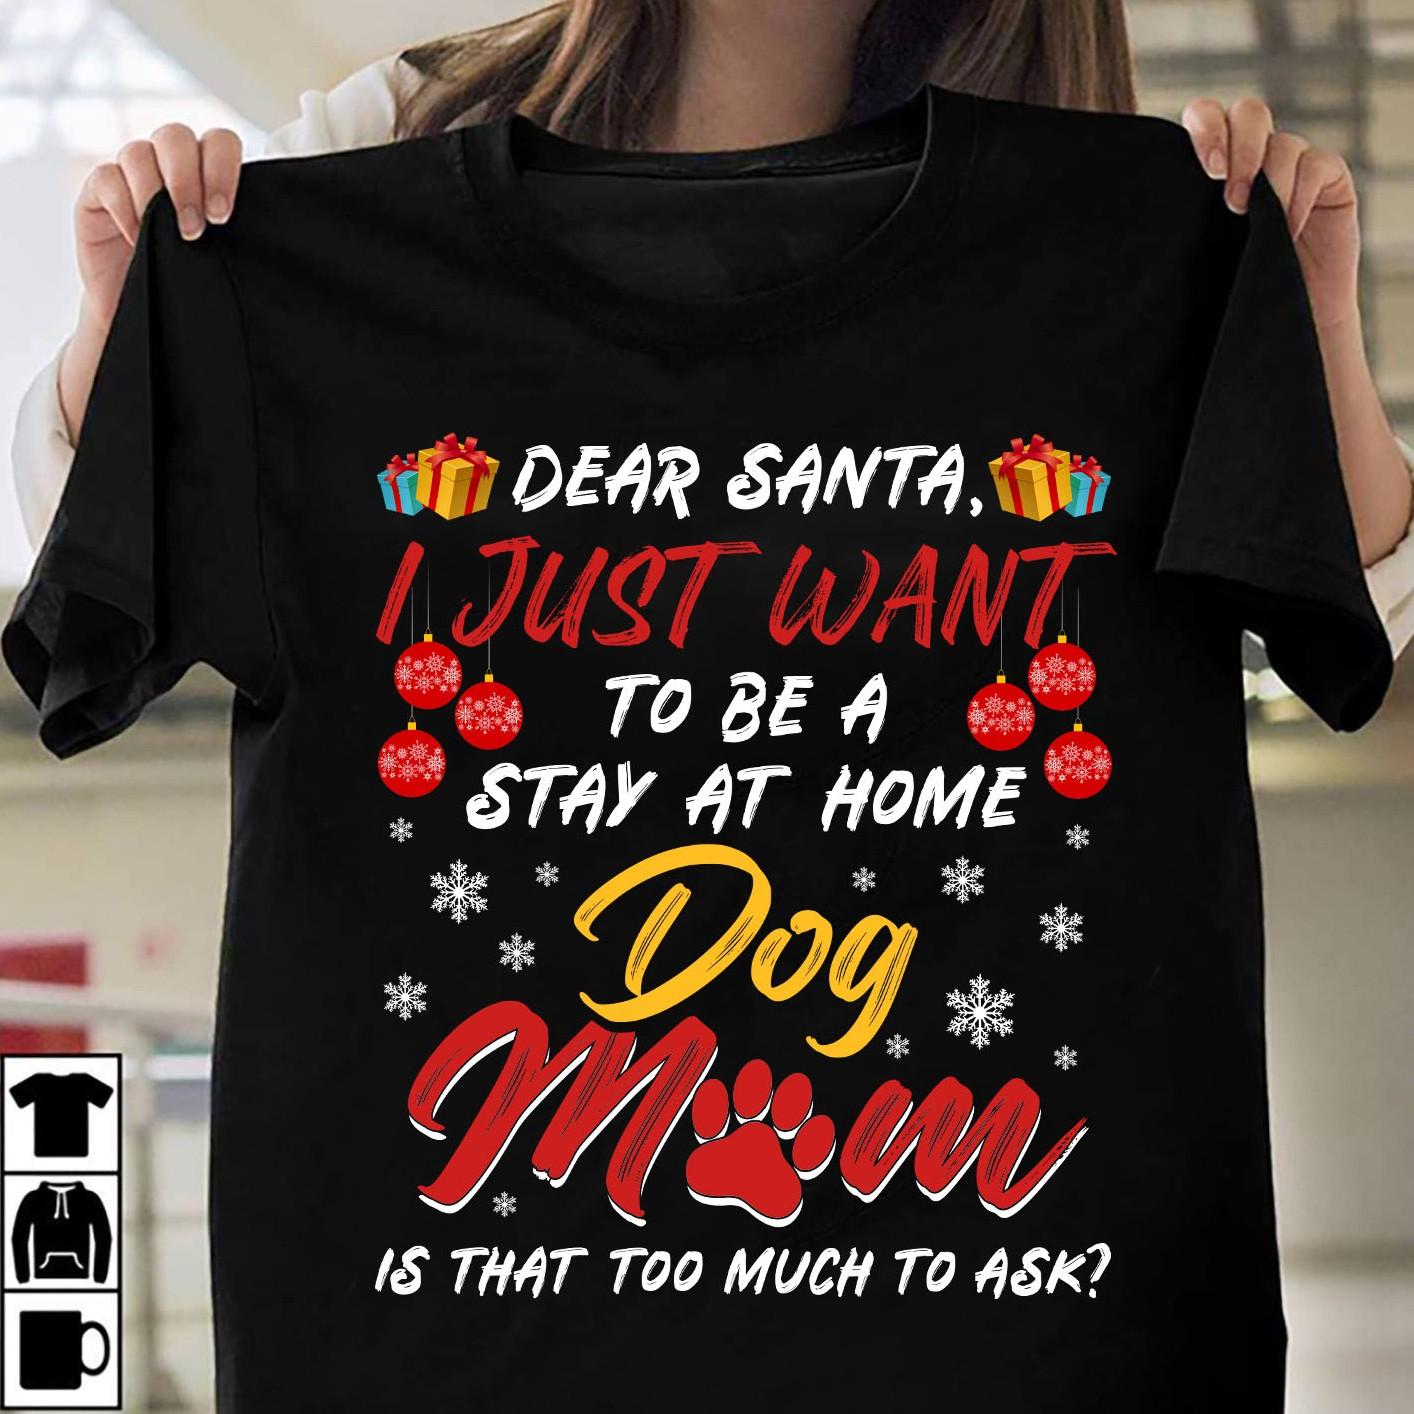 Dear Santa I just want to be a stay at home dog mom is that too much to ask?